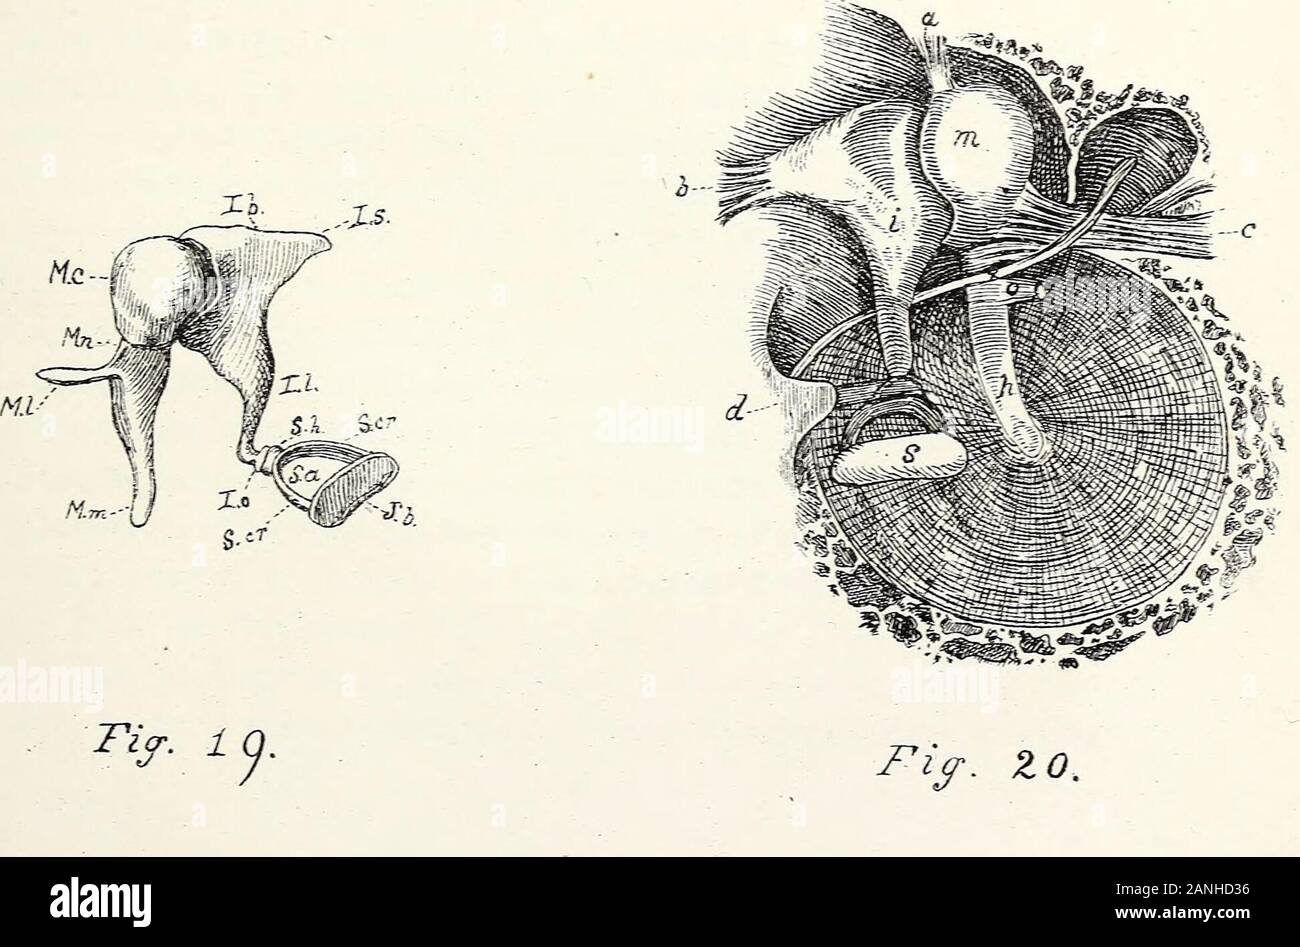 Education of Deaf-Mutes : A Manual for Teachers . hlea;k, apex of the petrous bone ; h, by the mastoid cells of the temporal bone ;a, the semicircular canals. Fig. 19.—The Ossicles of the Middle Eae (magnified). The partsof the malleus are lettered 3/; those of the incus /; and those of theStapes S. Mc, capitulum or head of the malleus ; 3fn, its neck ; Ml, the processusgracilis, or slender process ; the manubrium or handle. lb, body of the incus ; Is, its short, II, its long process ; lo, orbicularprocess. Sa, arch of the stapes; Sb, its base ; Scr, the crura or legs ; Sh, thehead. Fig. 20.—V Stock Photo